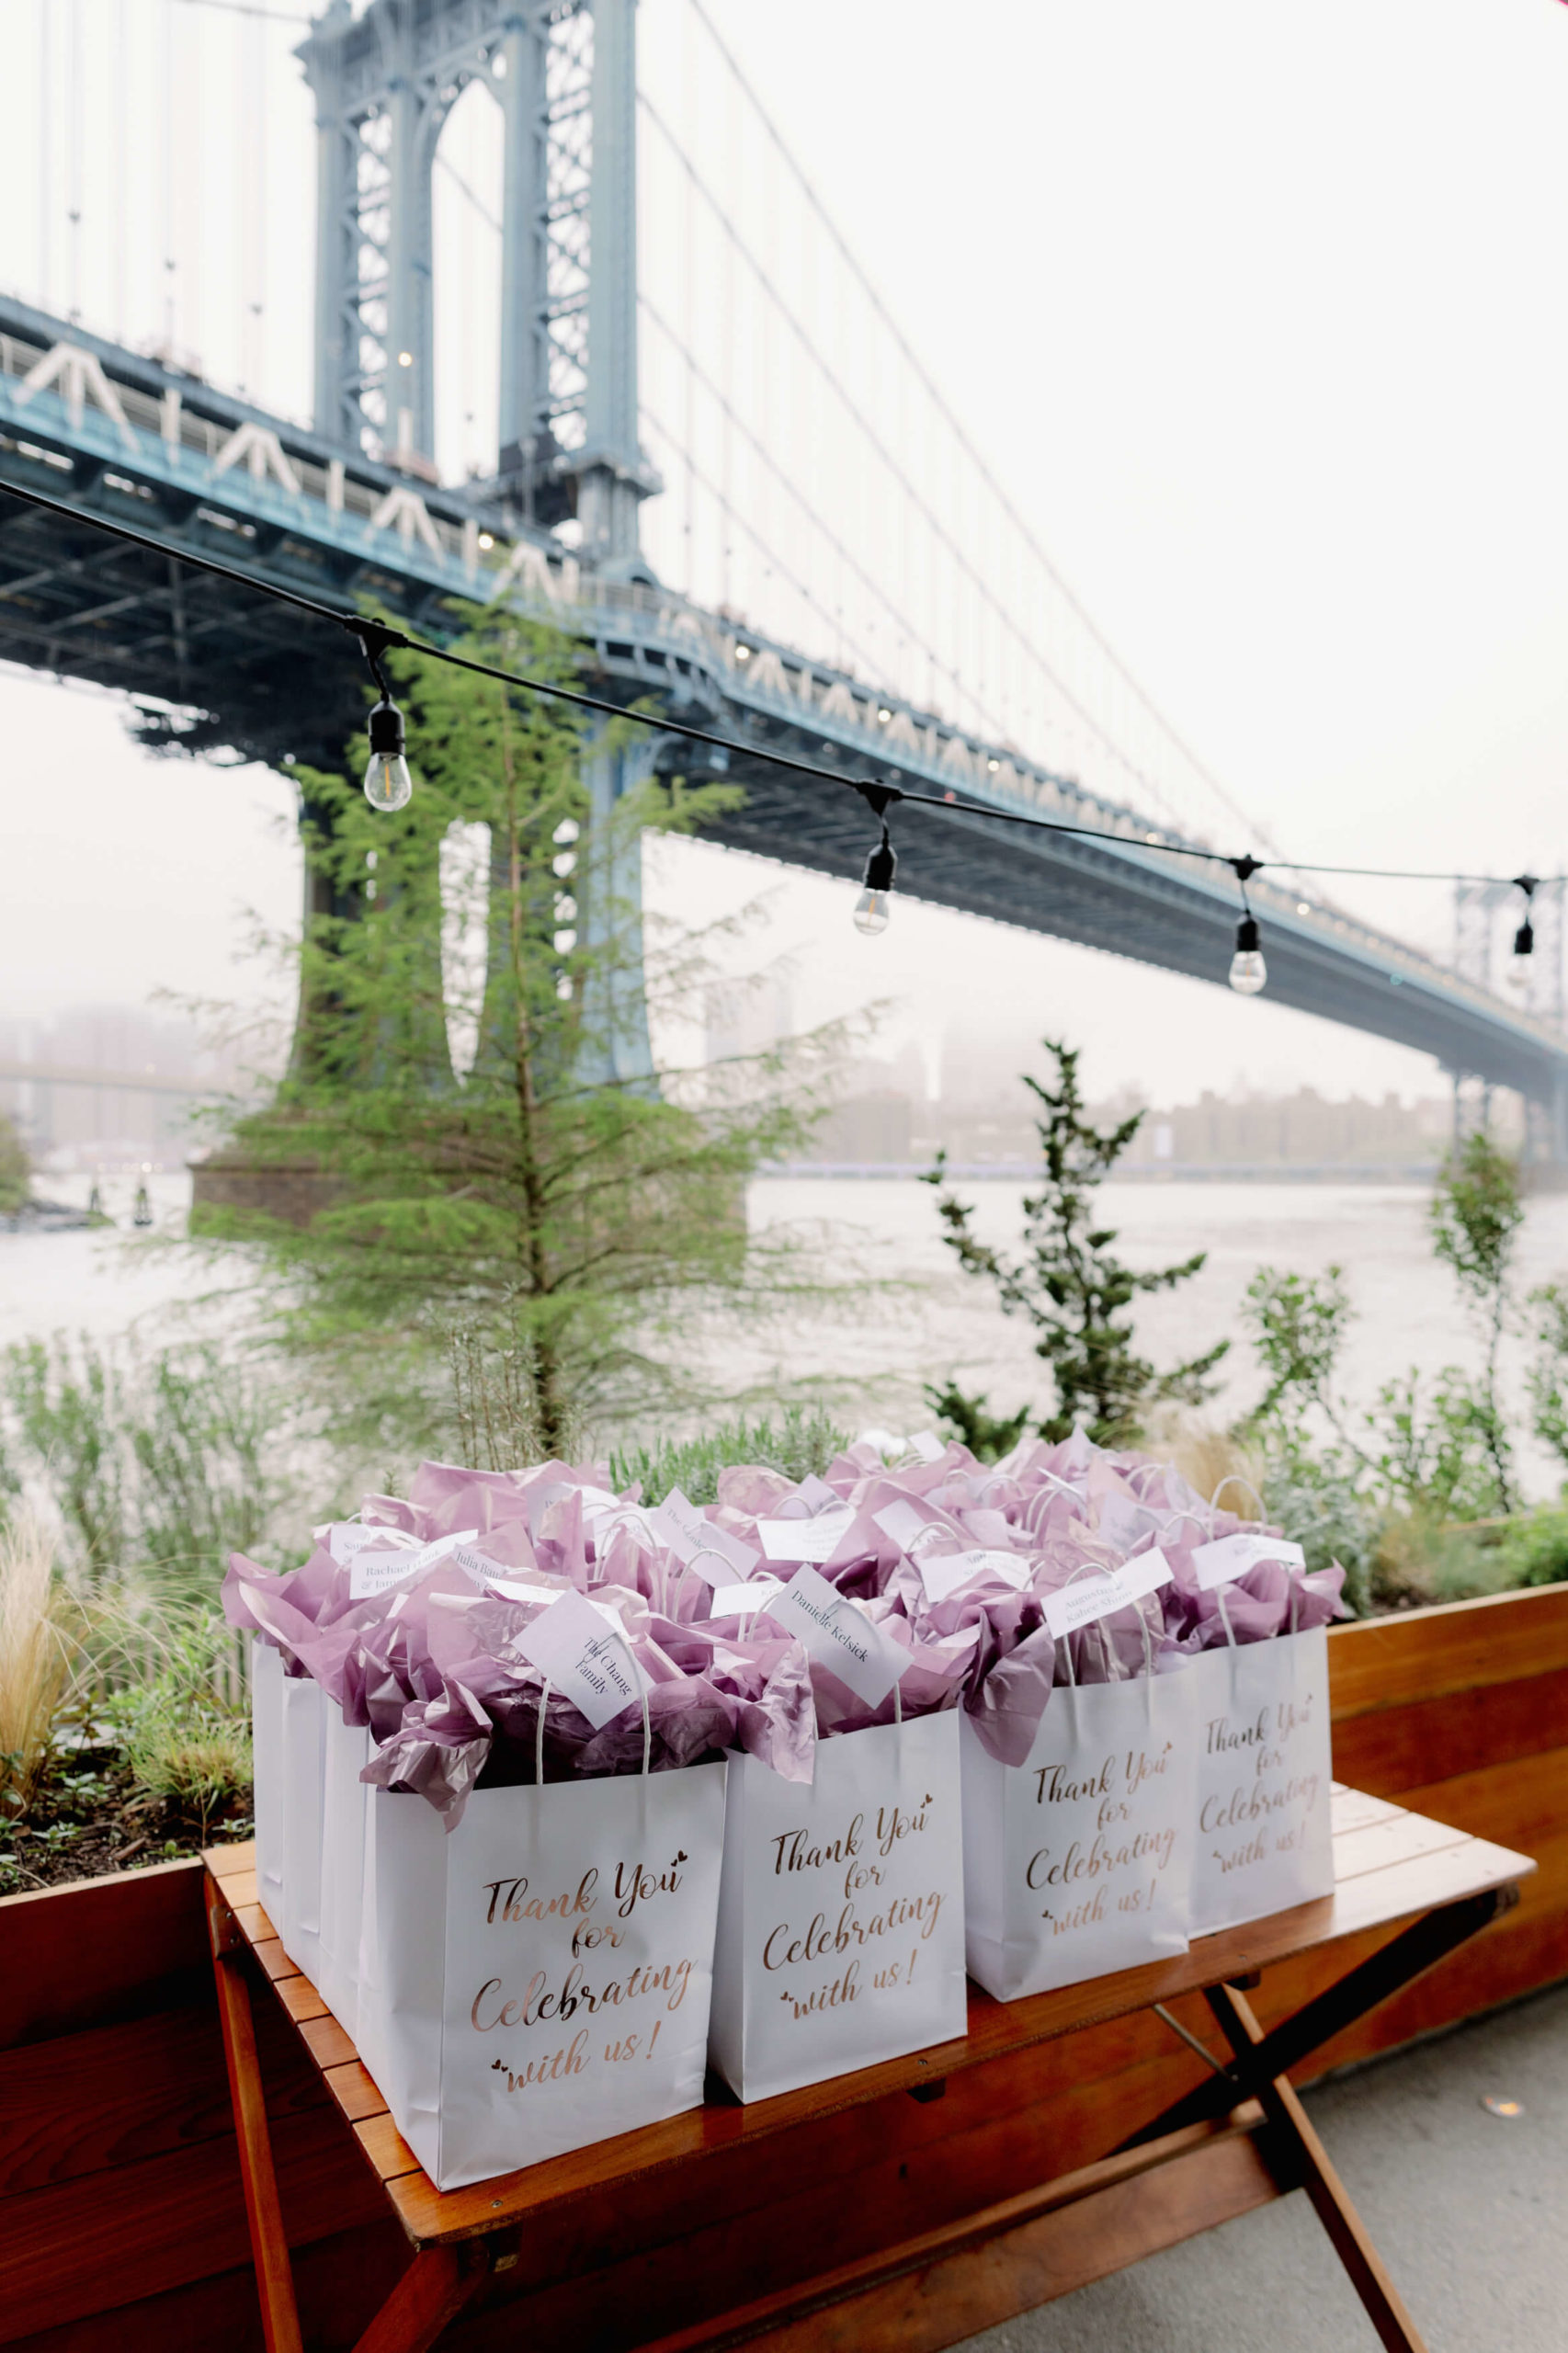 A bunch of paper bags filled with wedding favors on top of a wooden table at NYC. Hours of wedding photography image by Jenny Fu Studio